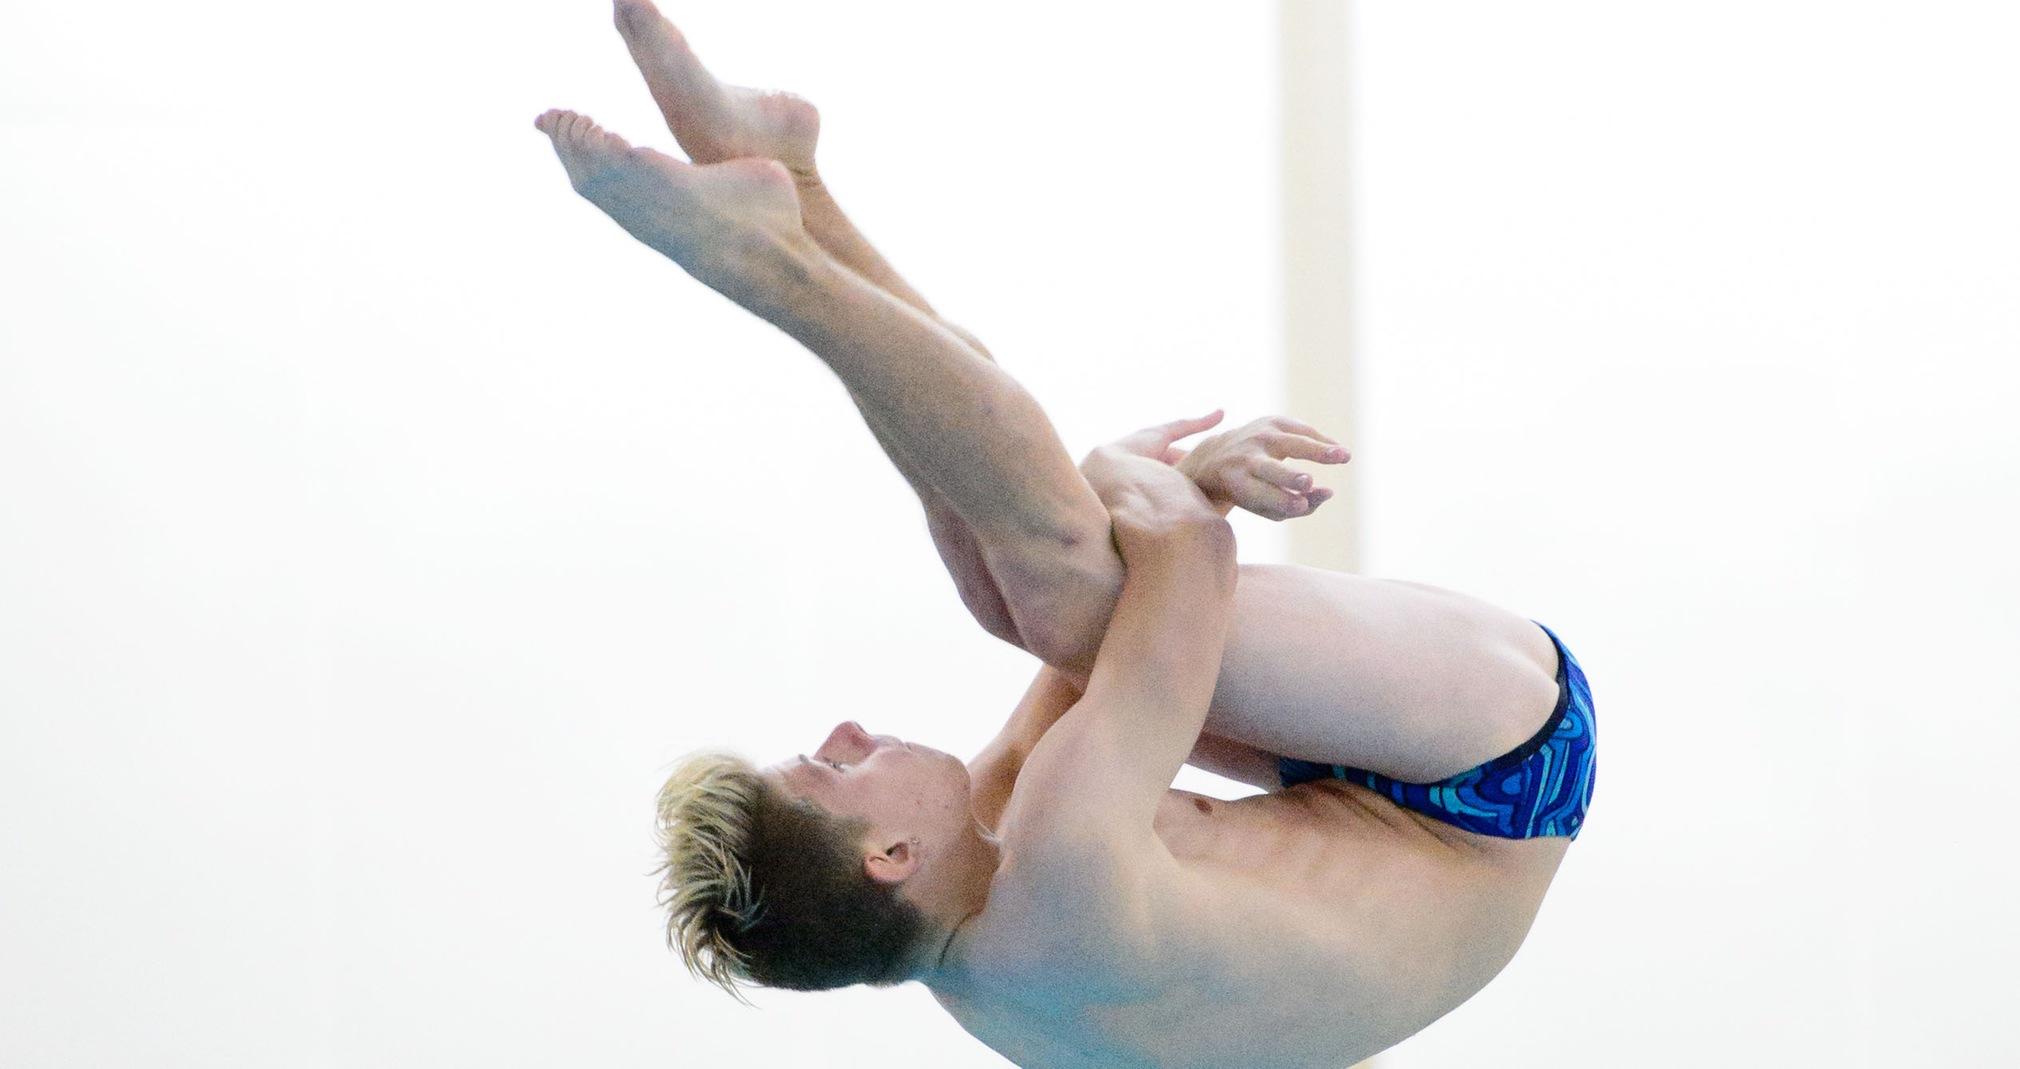 Matt Wilke won both diving events, posting scores of 462.15 off the 1-meter board and 488.60 off the 3-meter plank.